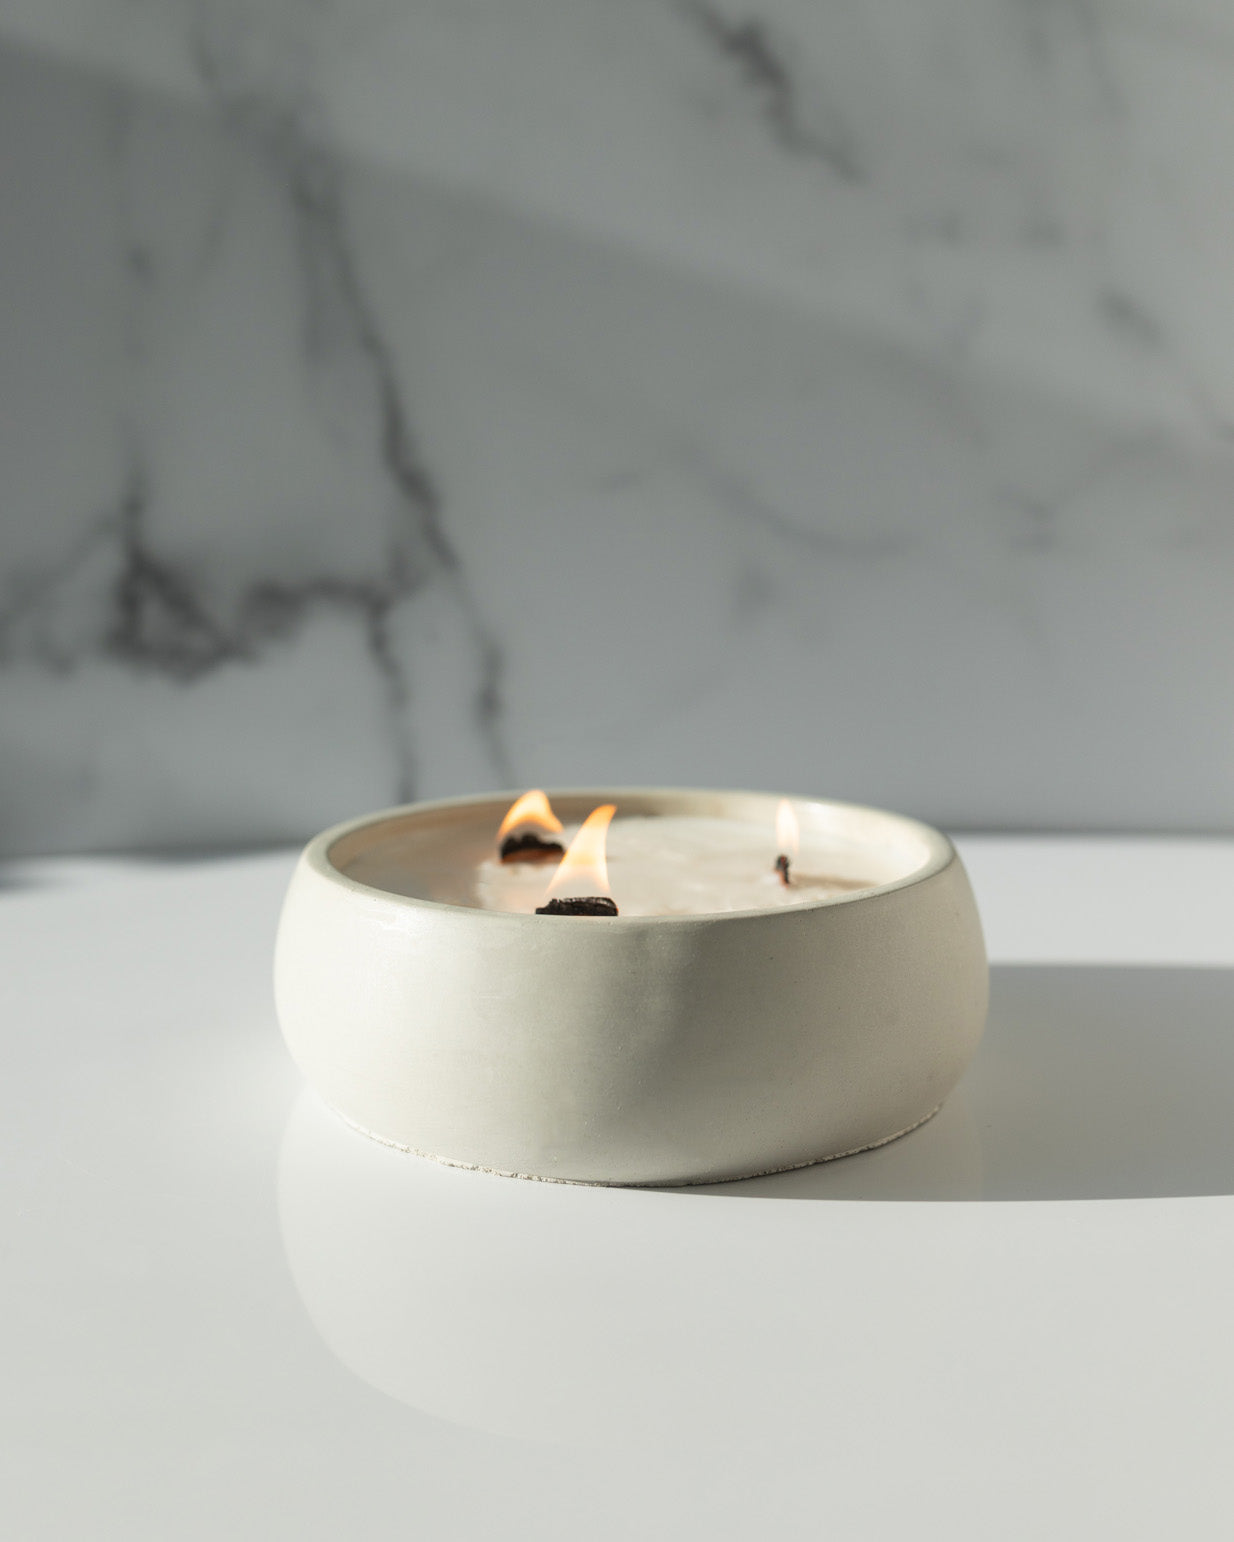 Calm Within the Chaos Coconut Soy Candle - Concrete Wooden Wick Vessel